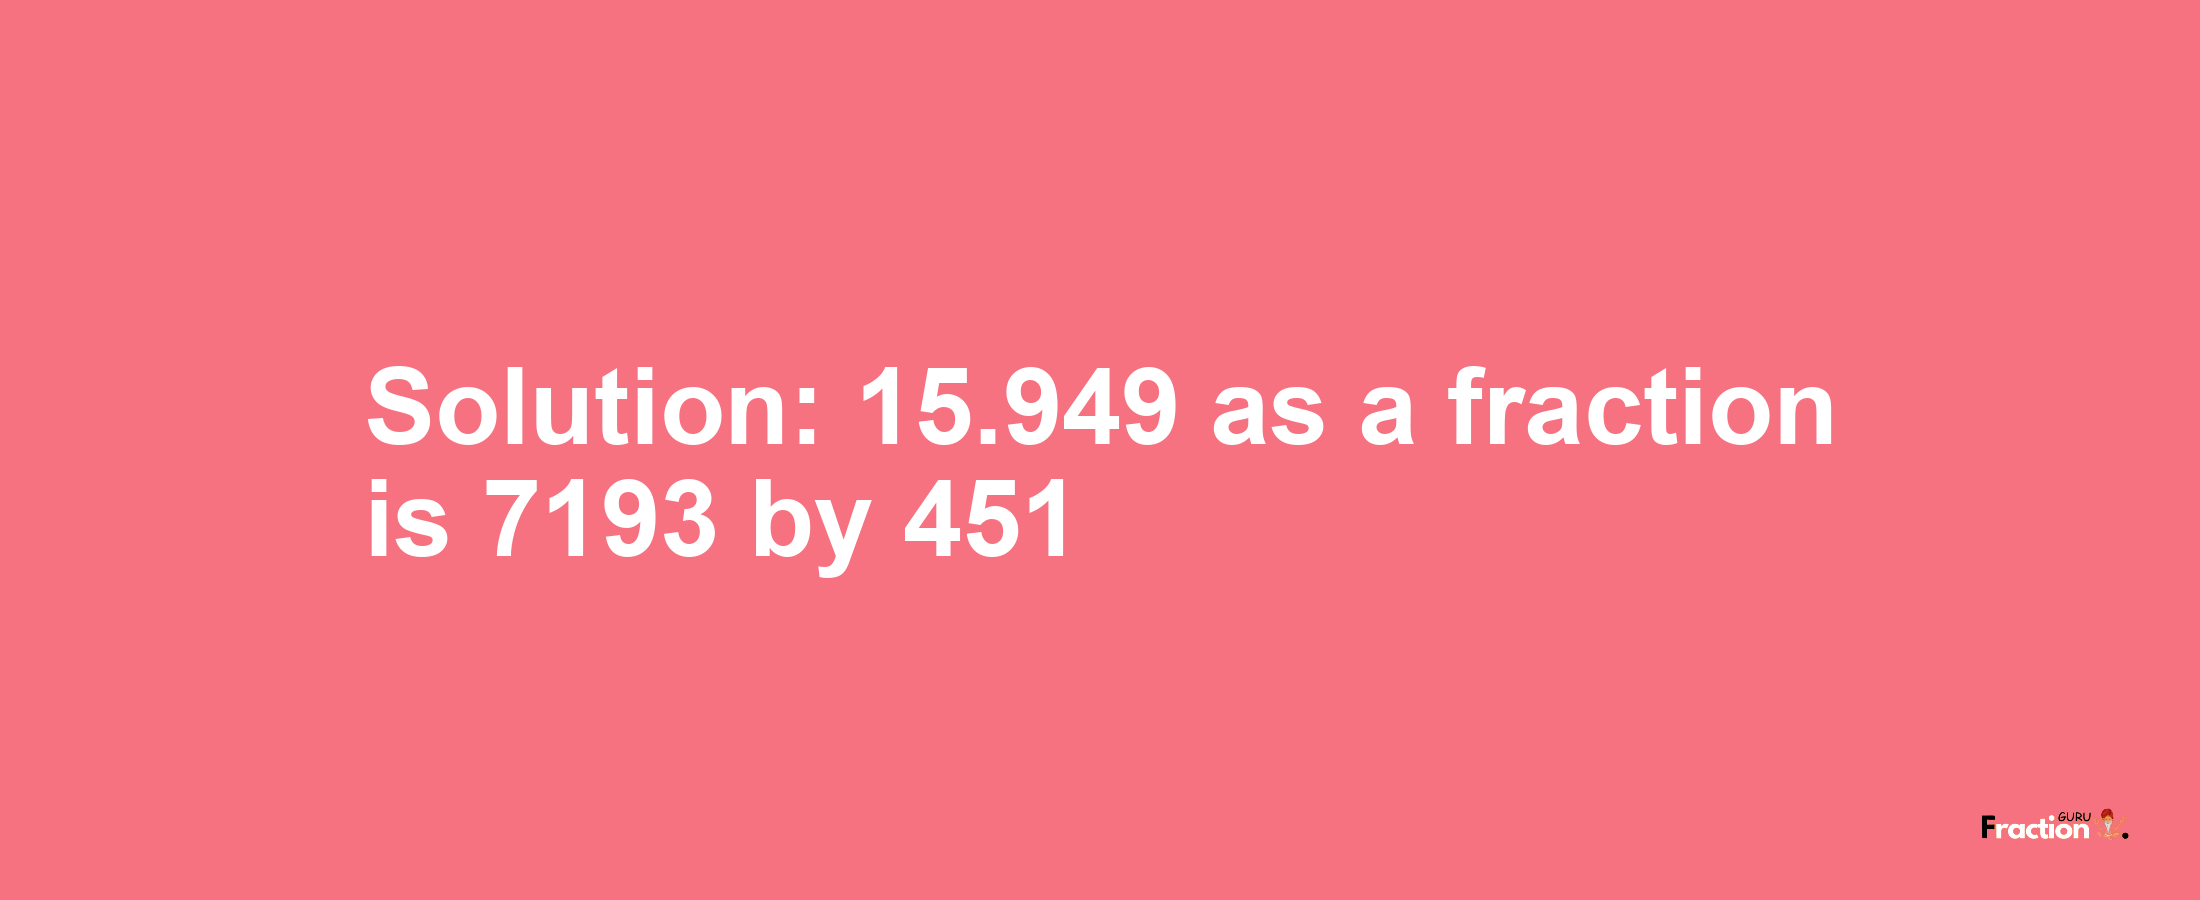 Solution:15.949 as a fraction is 7193/451